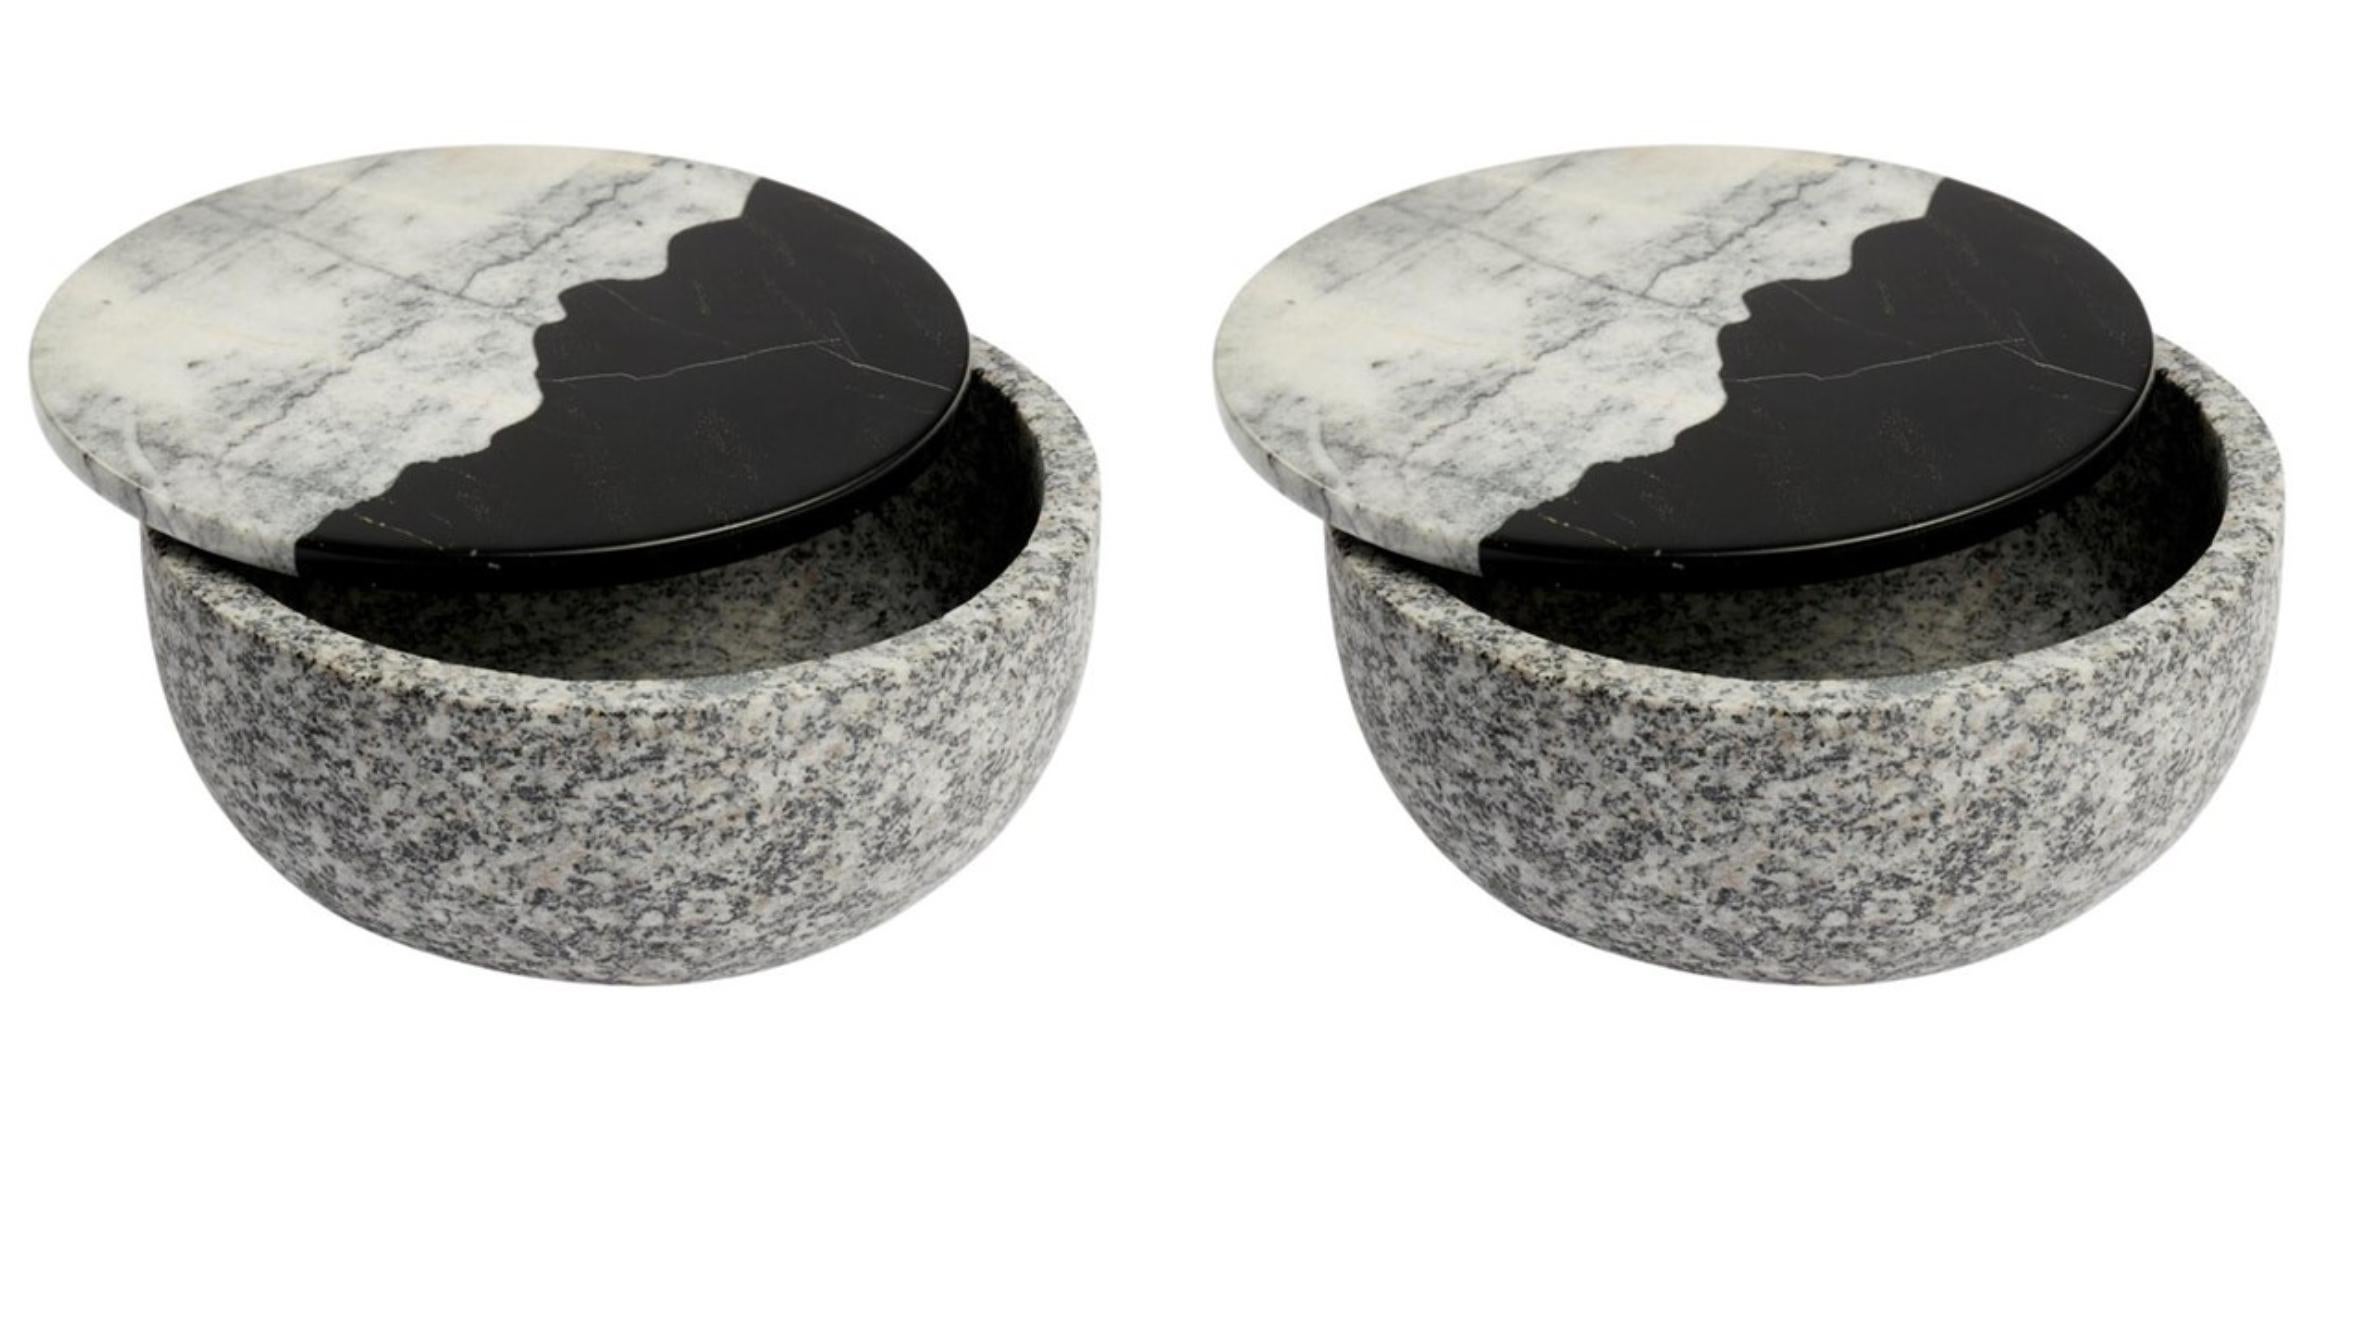 Set of 2 sprouter pot by Estudio Rafael Freyre
Dimensions: D 15 x H 8 cm 
Materials: Andes stone, amazonic wood.
Also available: other materials and finishes available

The Sprouters series explores the interaction of mineral and plant